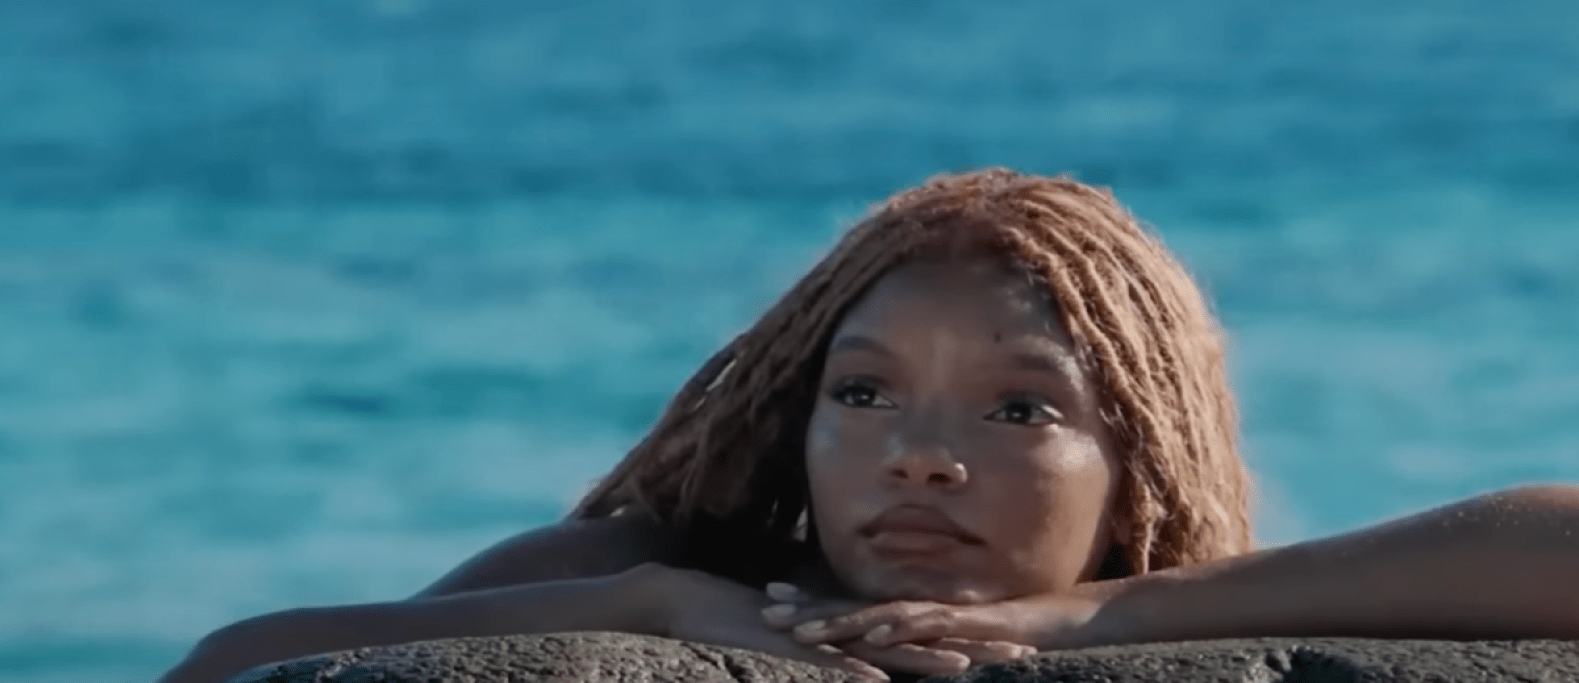 Halle Bailey as Ariel in the live-action remake of The Little Mermaid